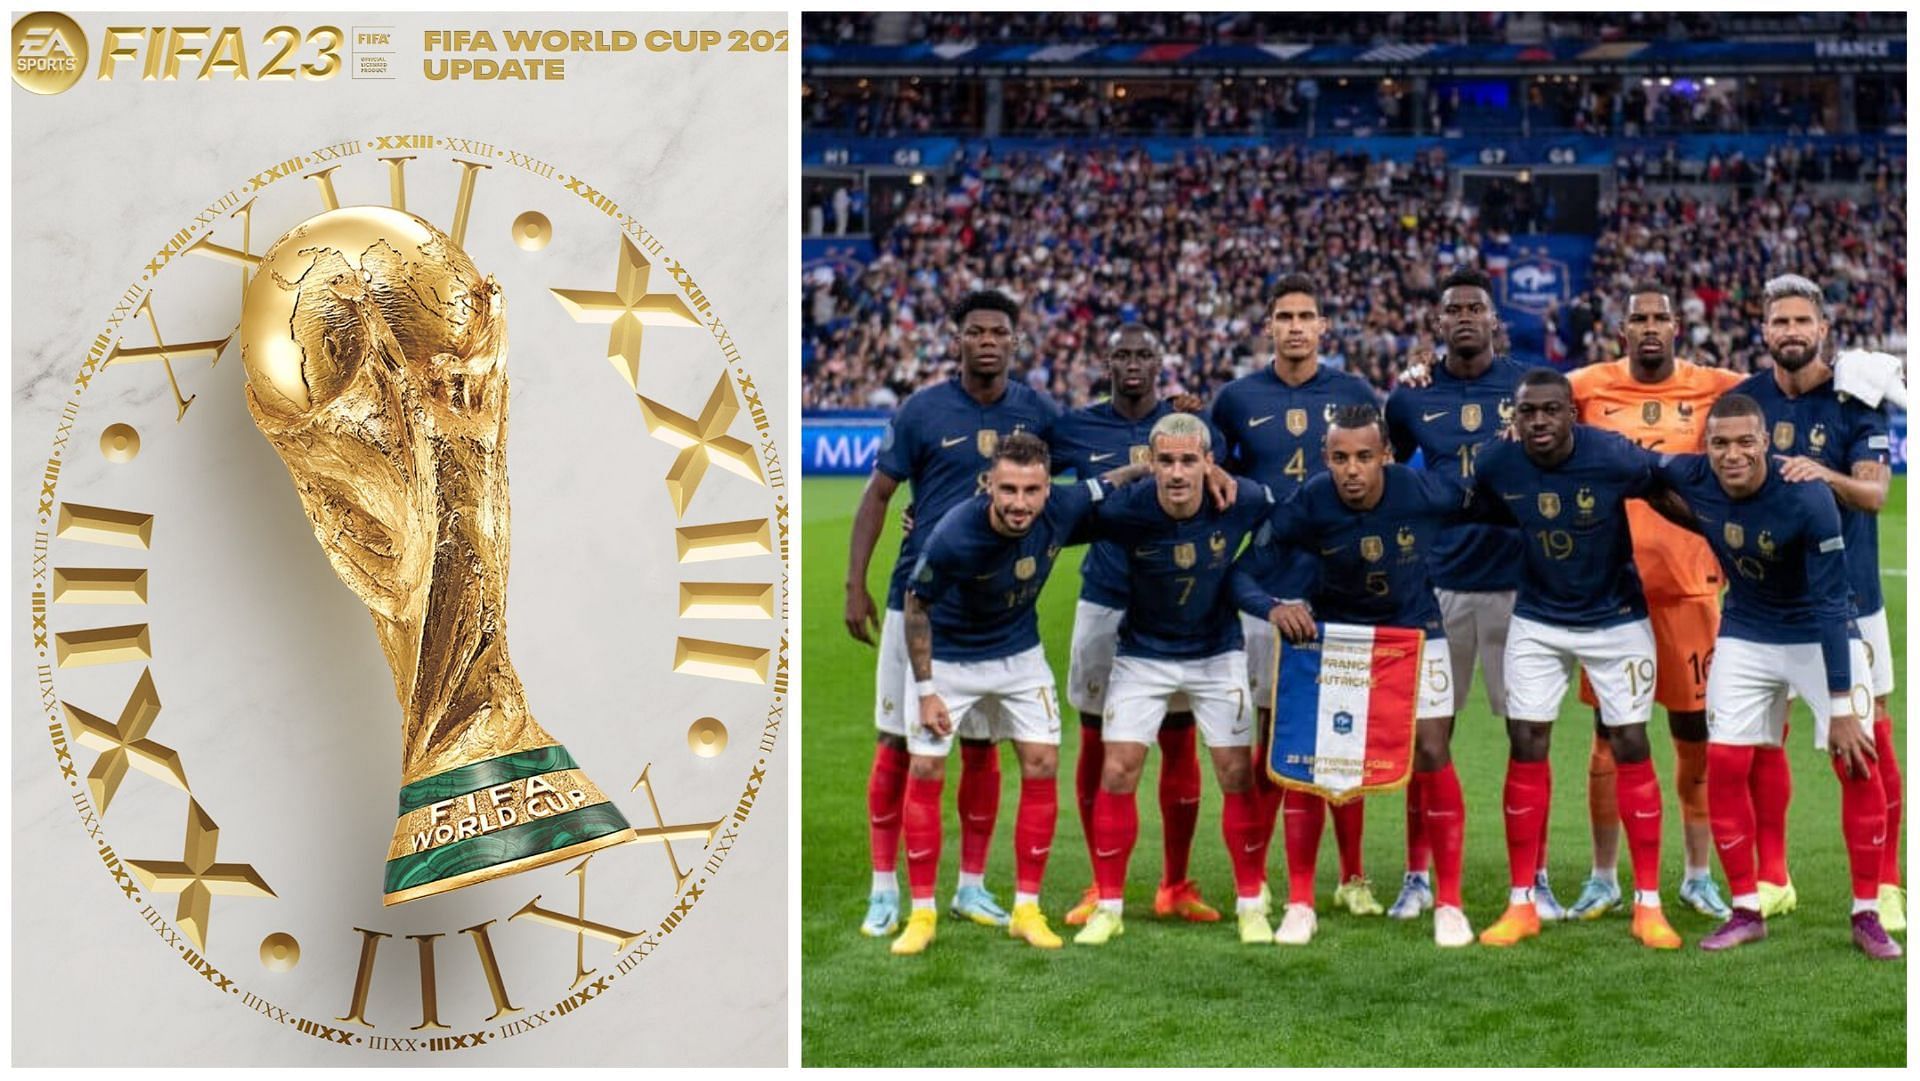 France has an overpowered squad in FIFA 23 (Images via EA Sports and Getty Images)